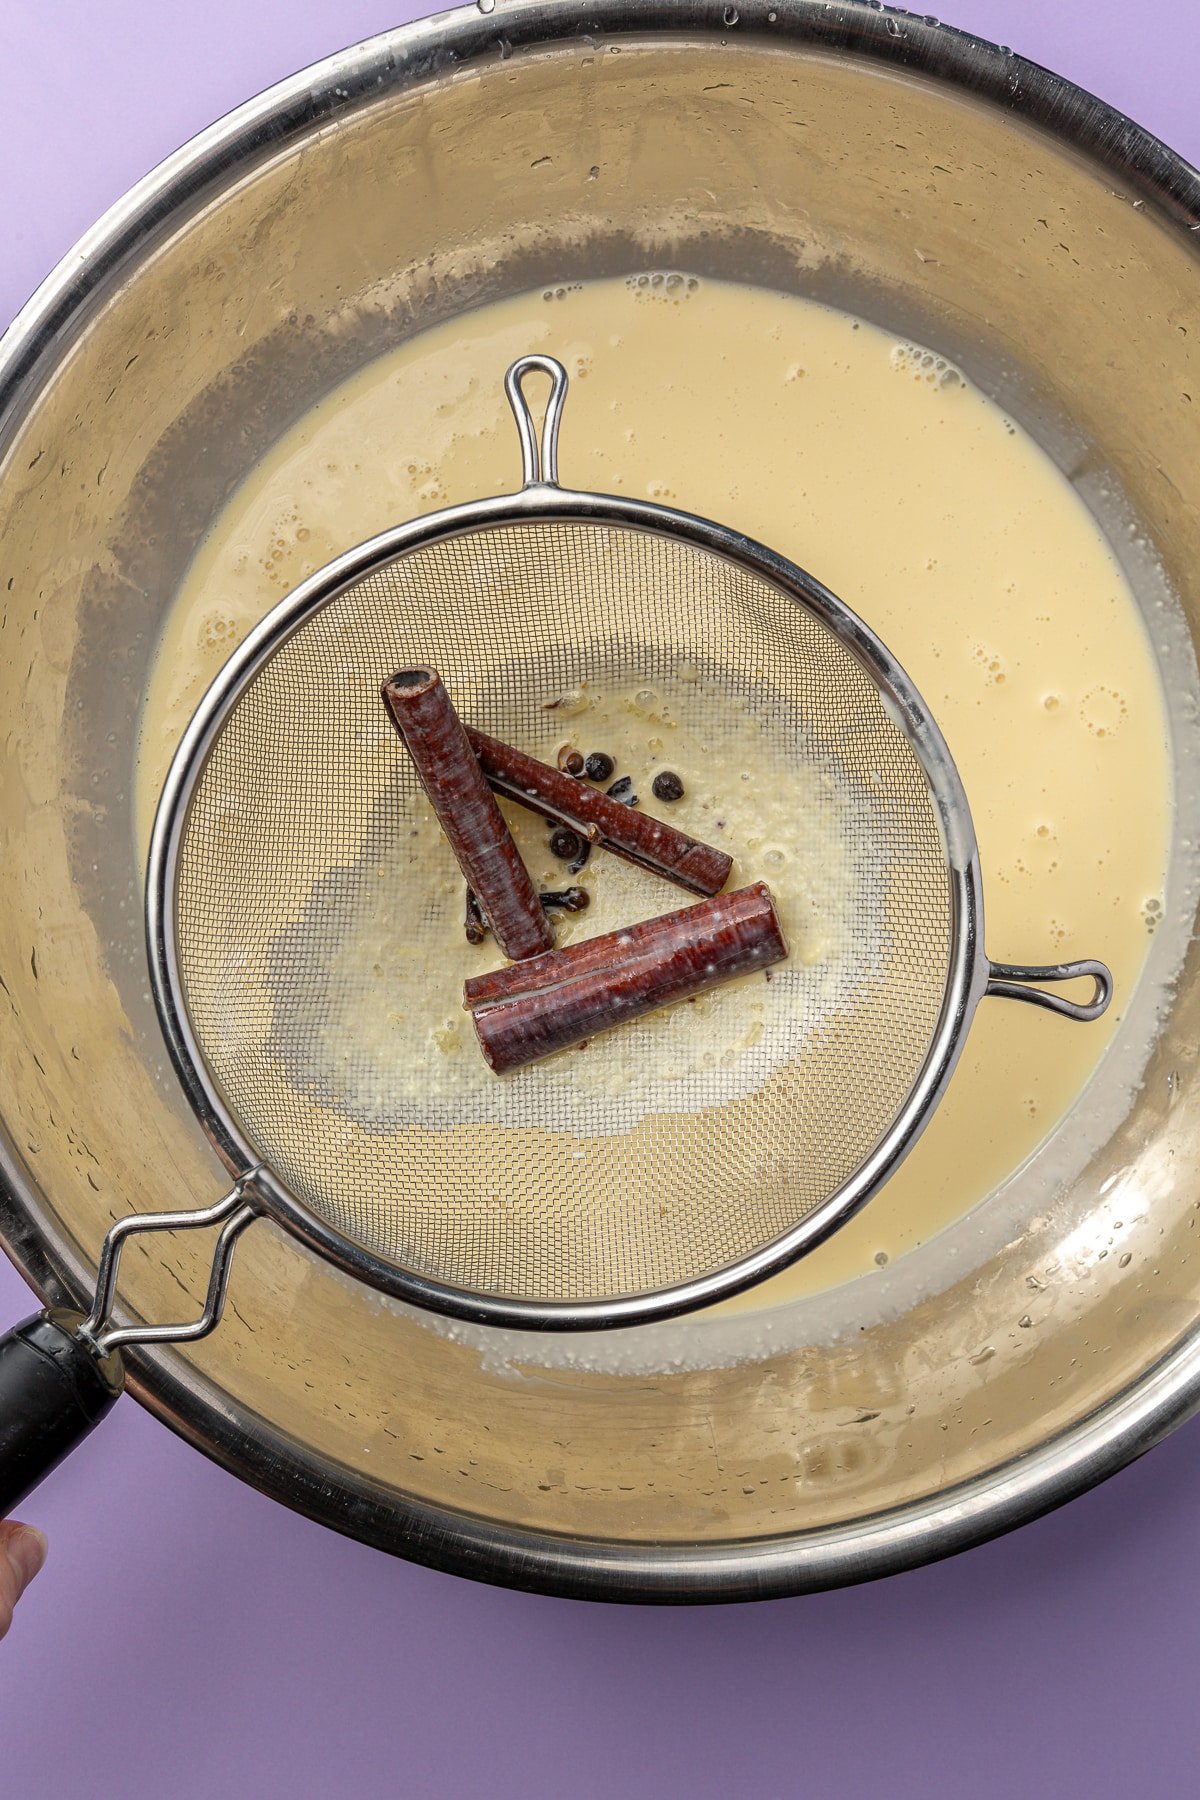 A colander is shown scooping out cinnamon sticks and cloves from the milky mixture.